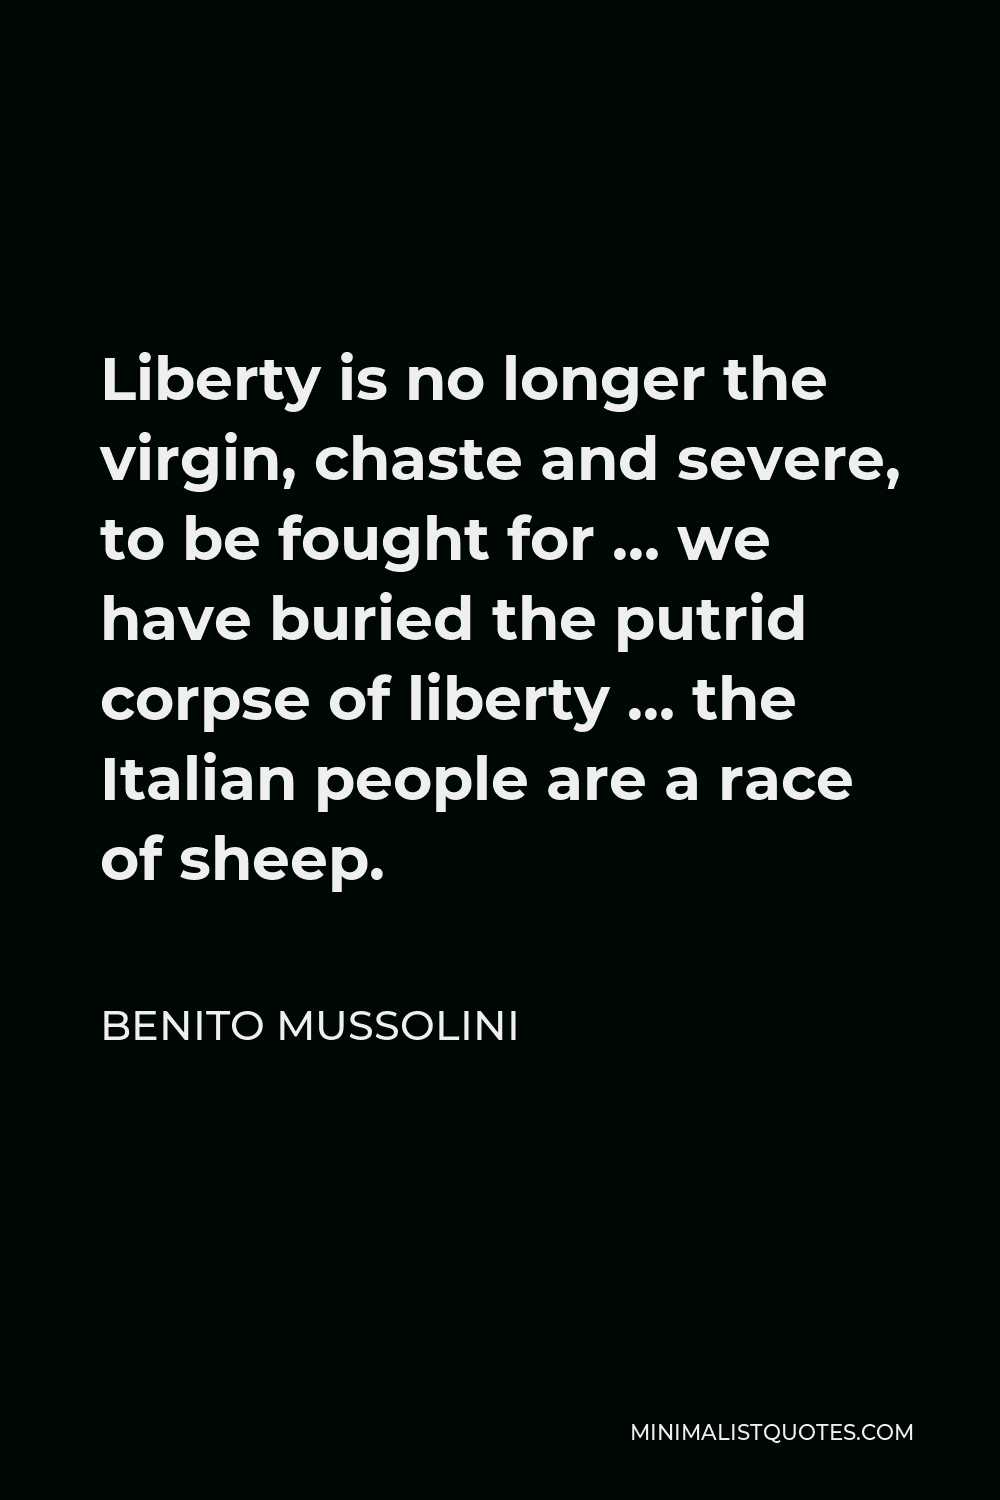 Benito Mussolini Quote - Liberty is no longer the virgin, chaste and severe, to be fought for … we have buried the putrid corpse of liberty … the Italian people are a race of sheep.